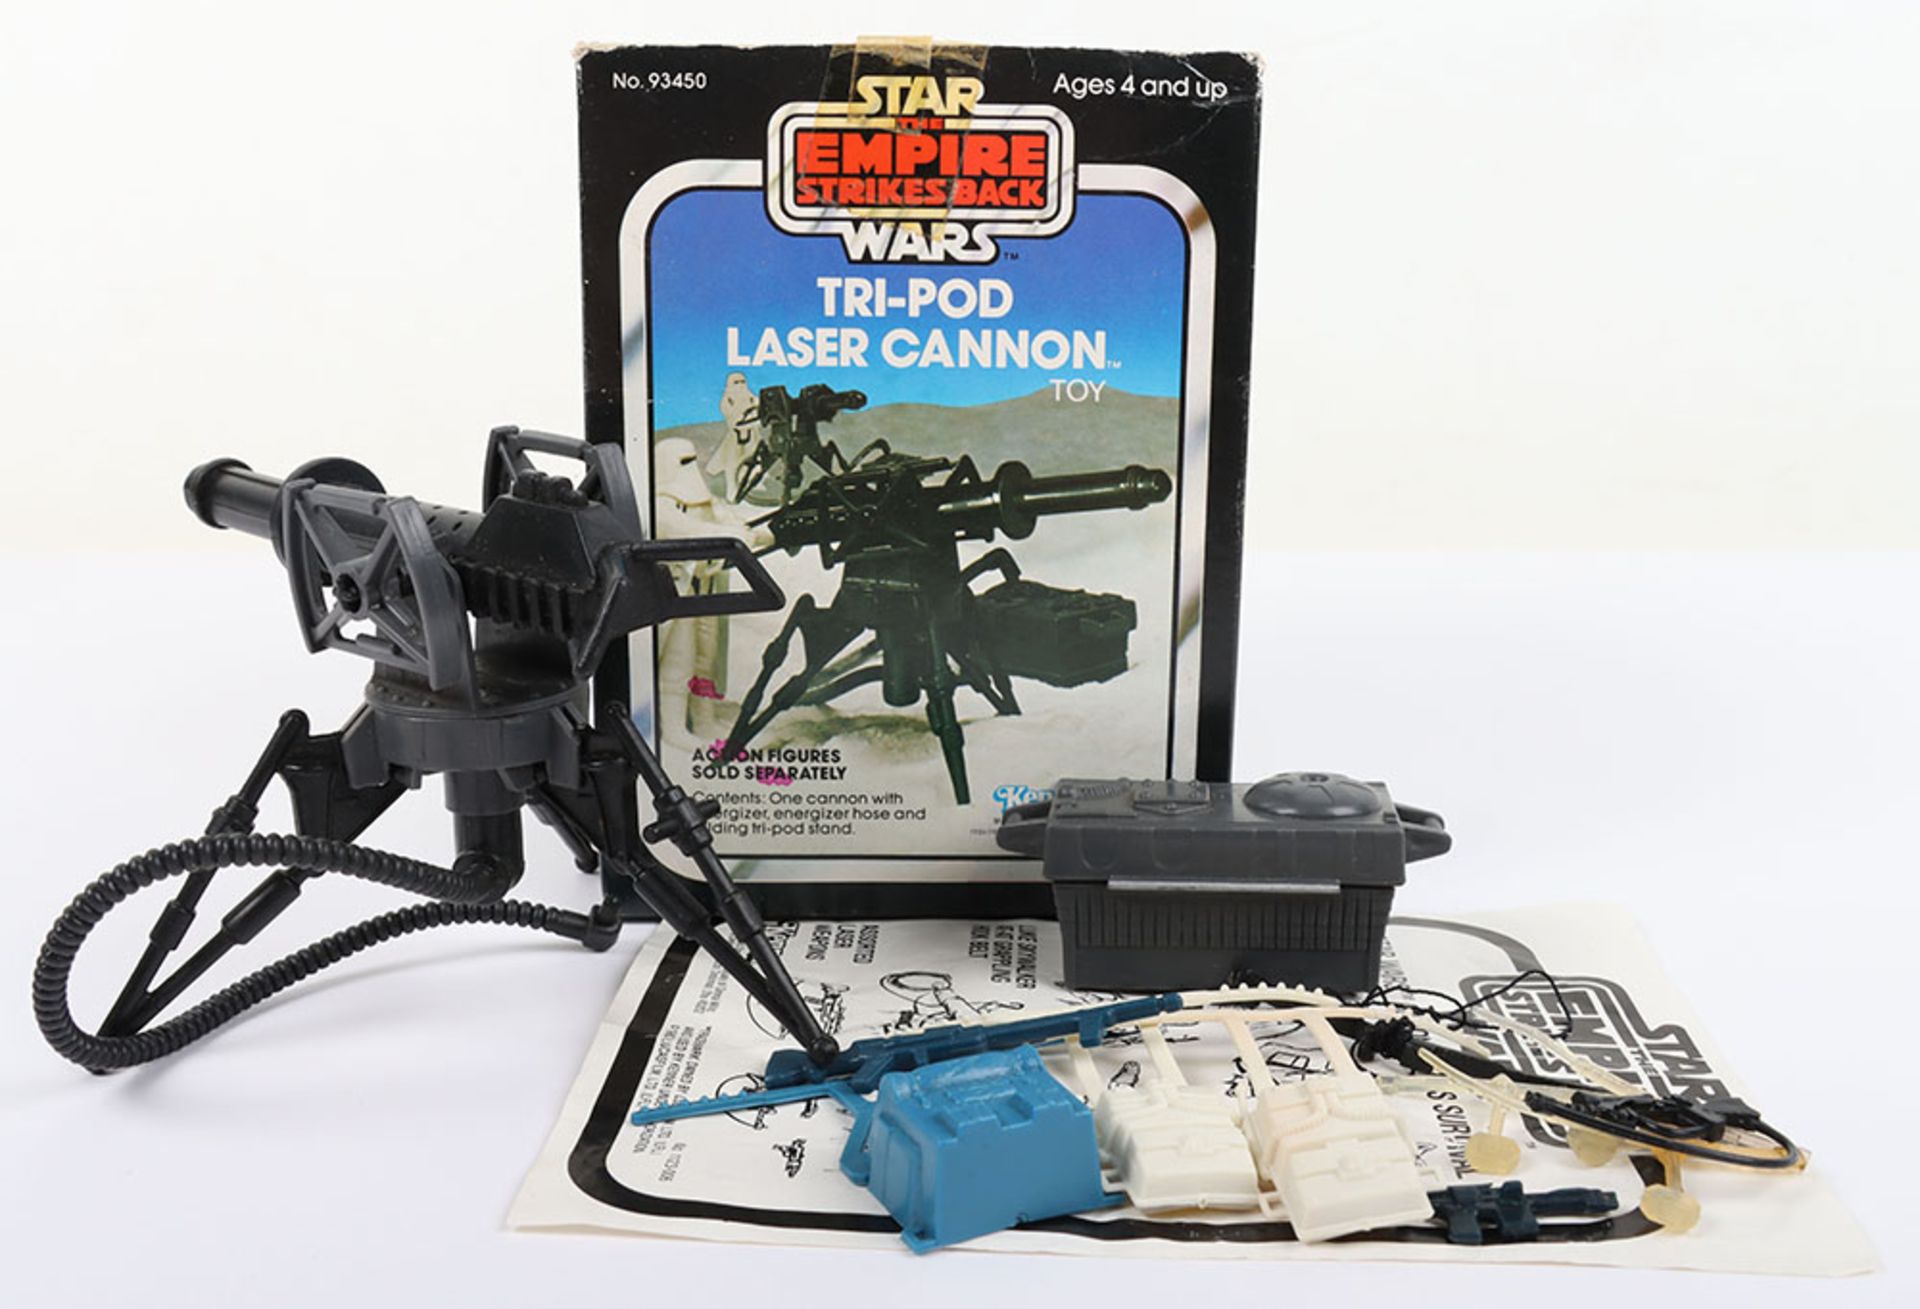 Kenner Star Wars The Empire Strikes Back Tri-Pod Laser Cannon - Image 2 of 2